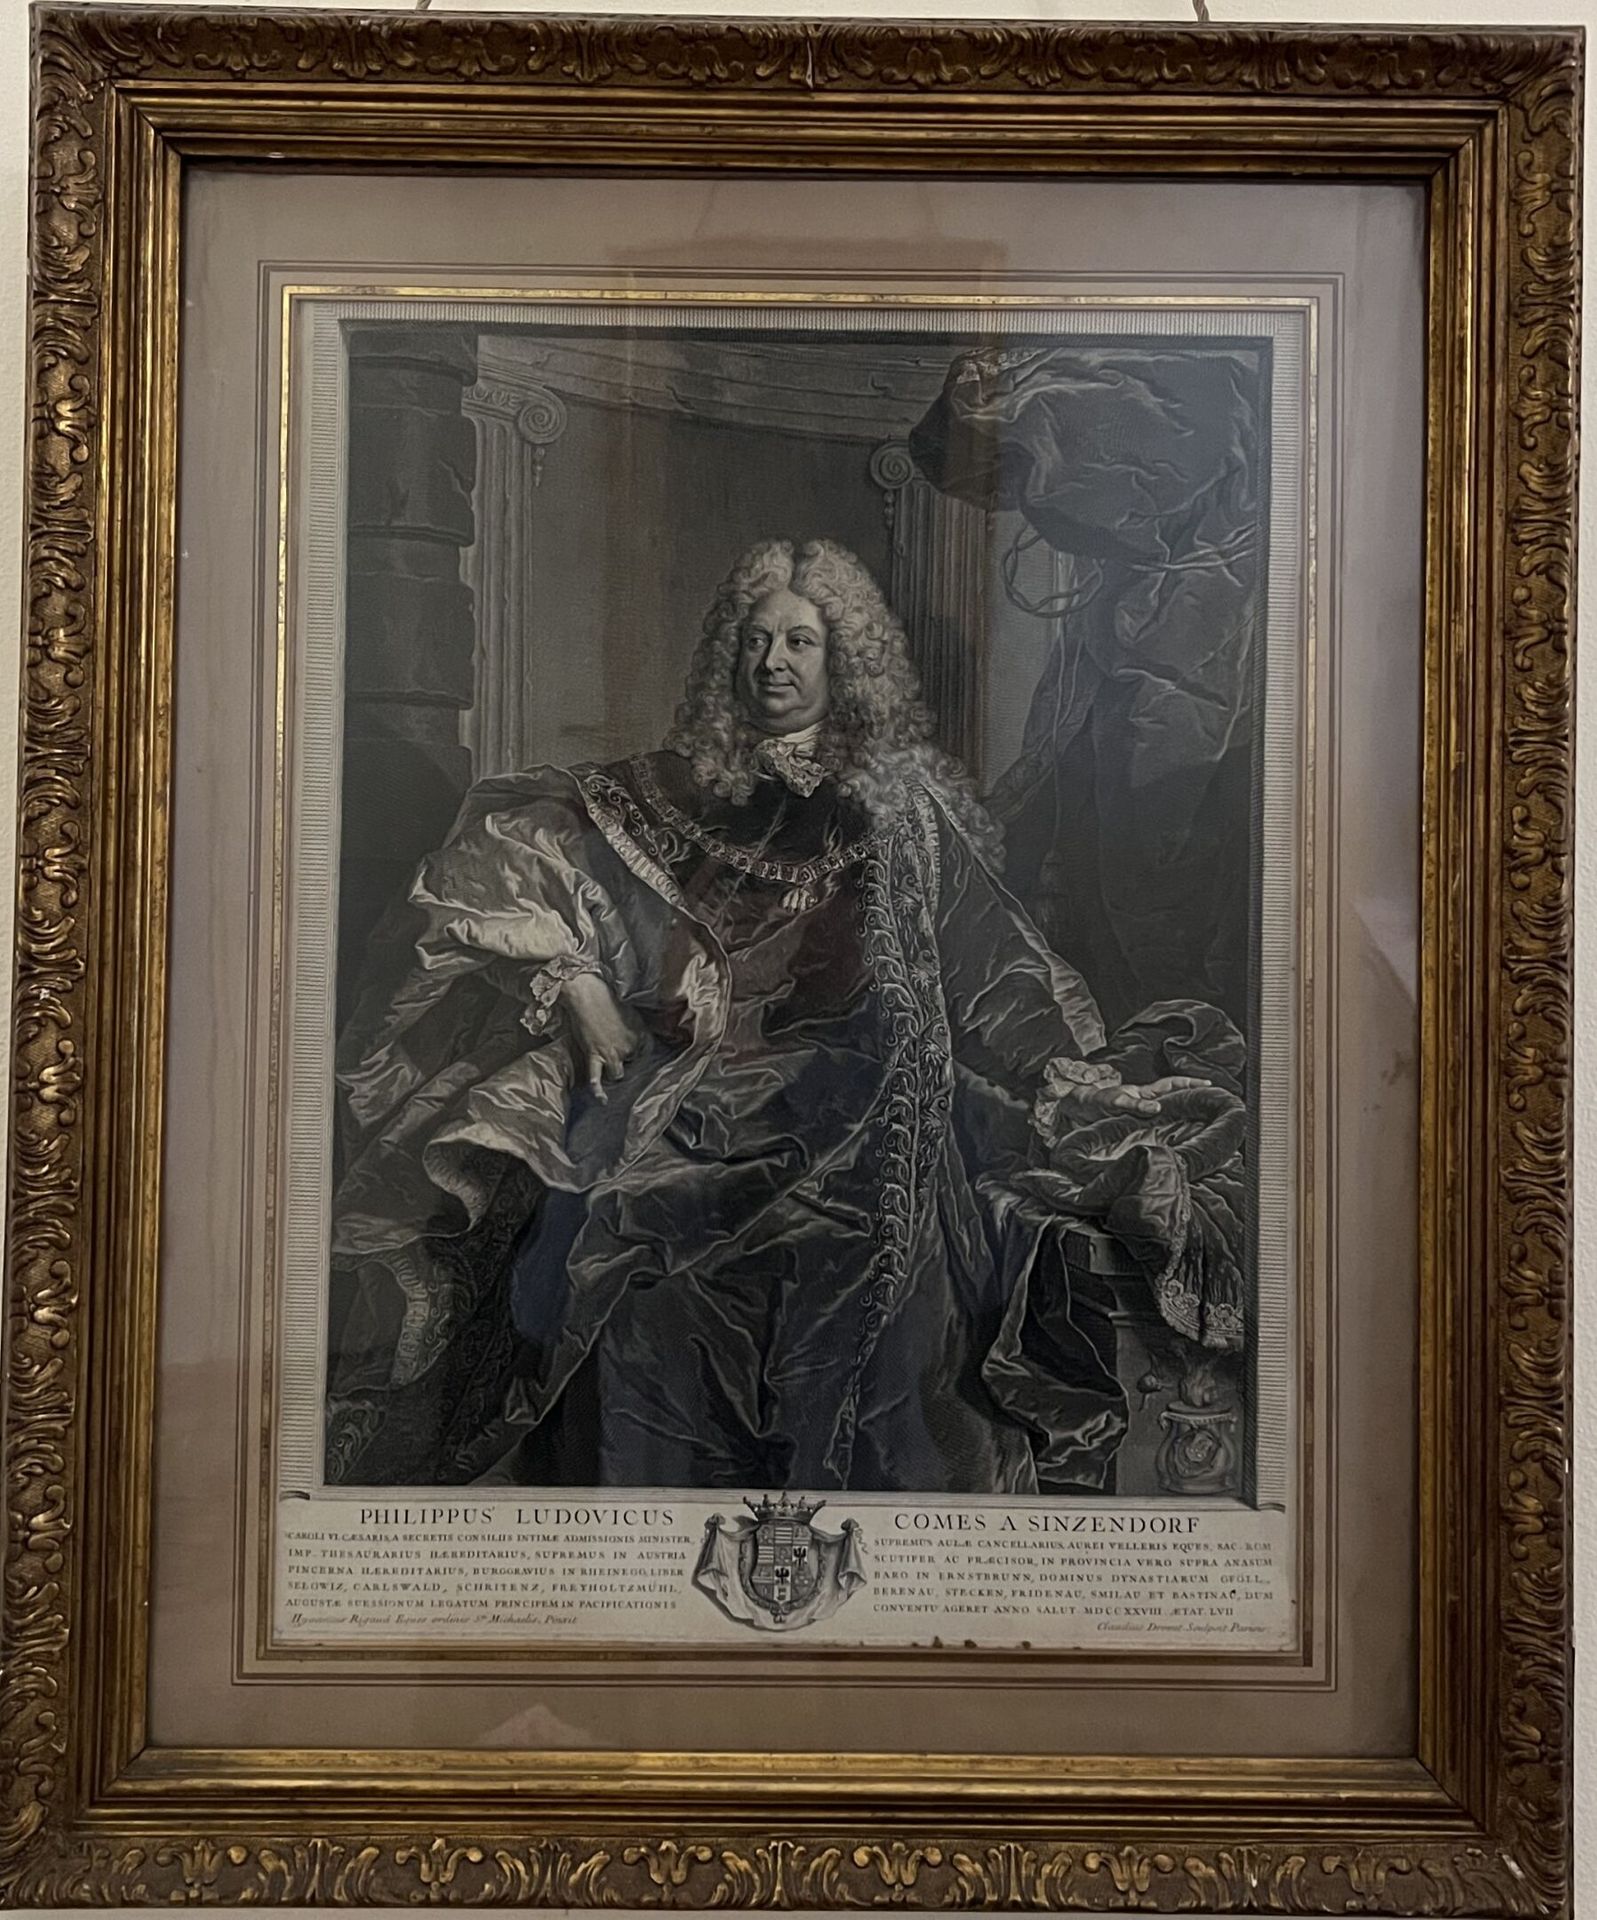 Null D'après Hyacinthe Rigaud (1659-1743)

"Philippus Ludovicus comes a sinzendo&hellip;